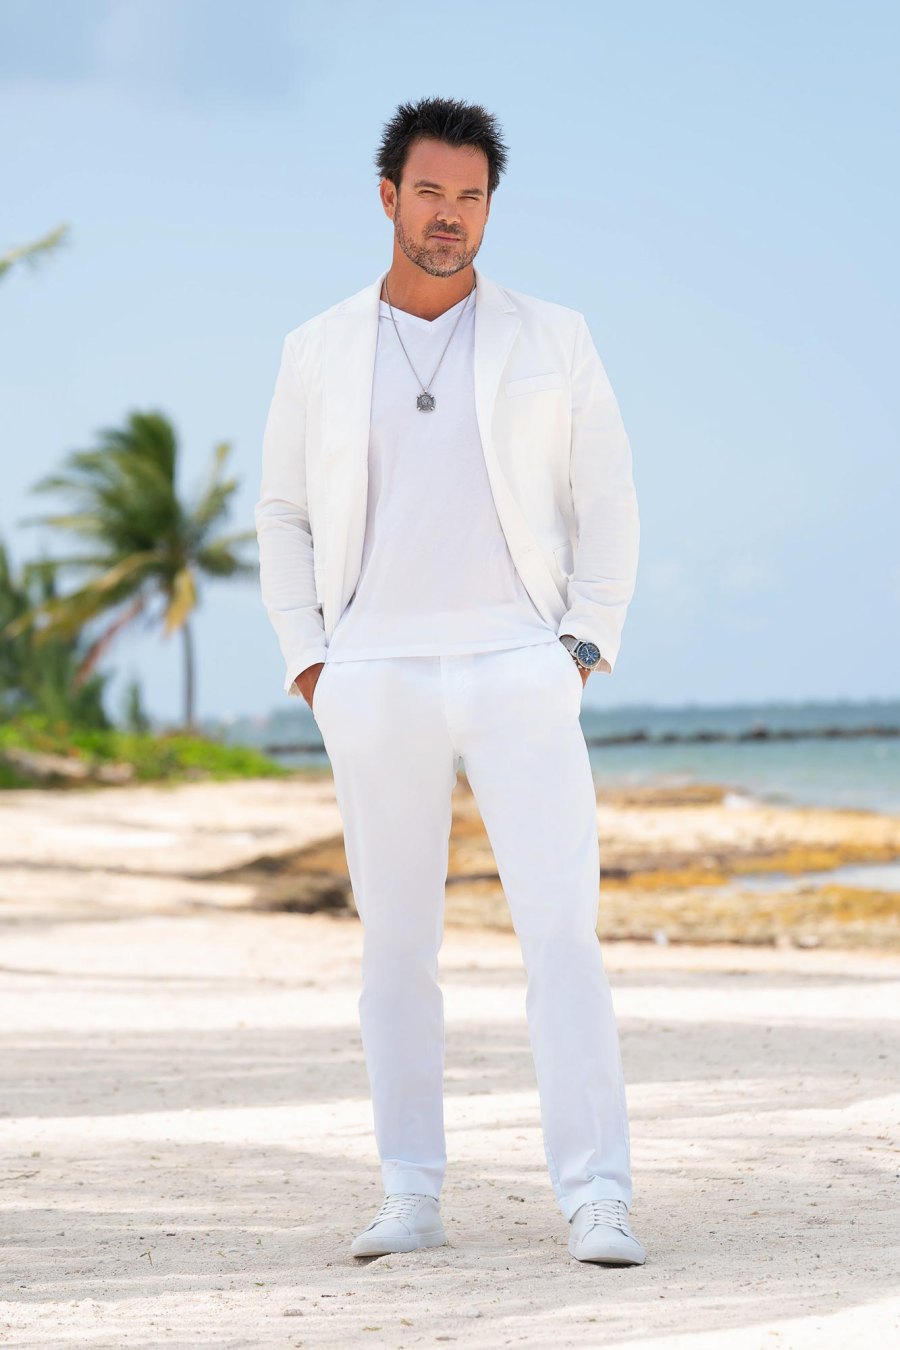 Grand Cayman Secrets in Paradise Cast Reveals Their Biggest Reality TV Lessons — and Regrets 514 Dillon Claassens